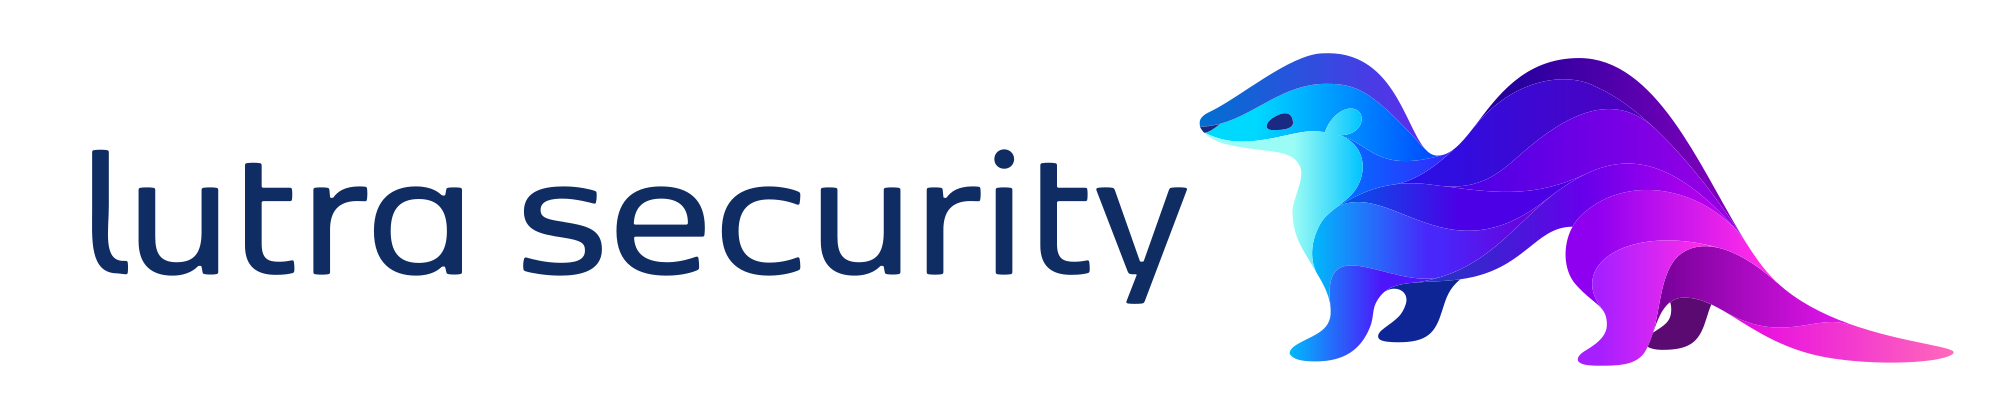 Lutra Security GmbH